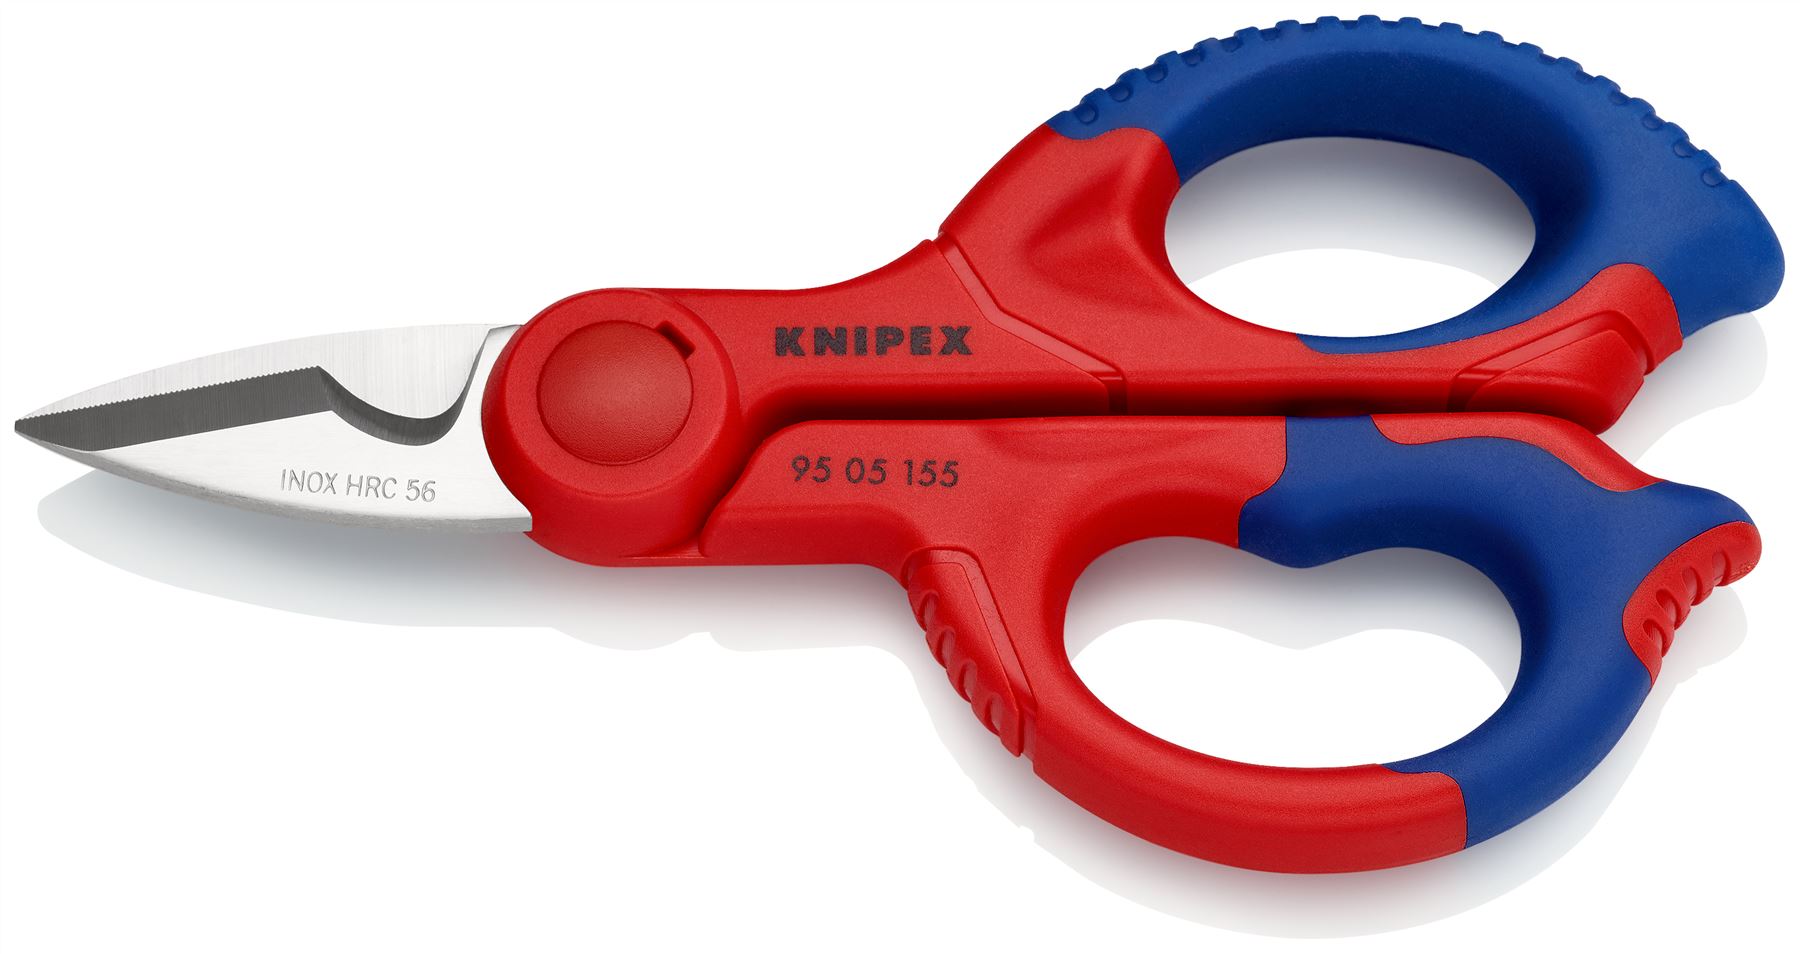 KNIPEX Electricians Shears Scissors with Plastic Belt Pouch 155mm Multi Component Grips 95 05 155 SB